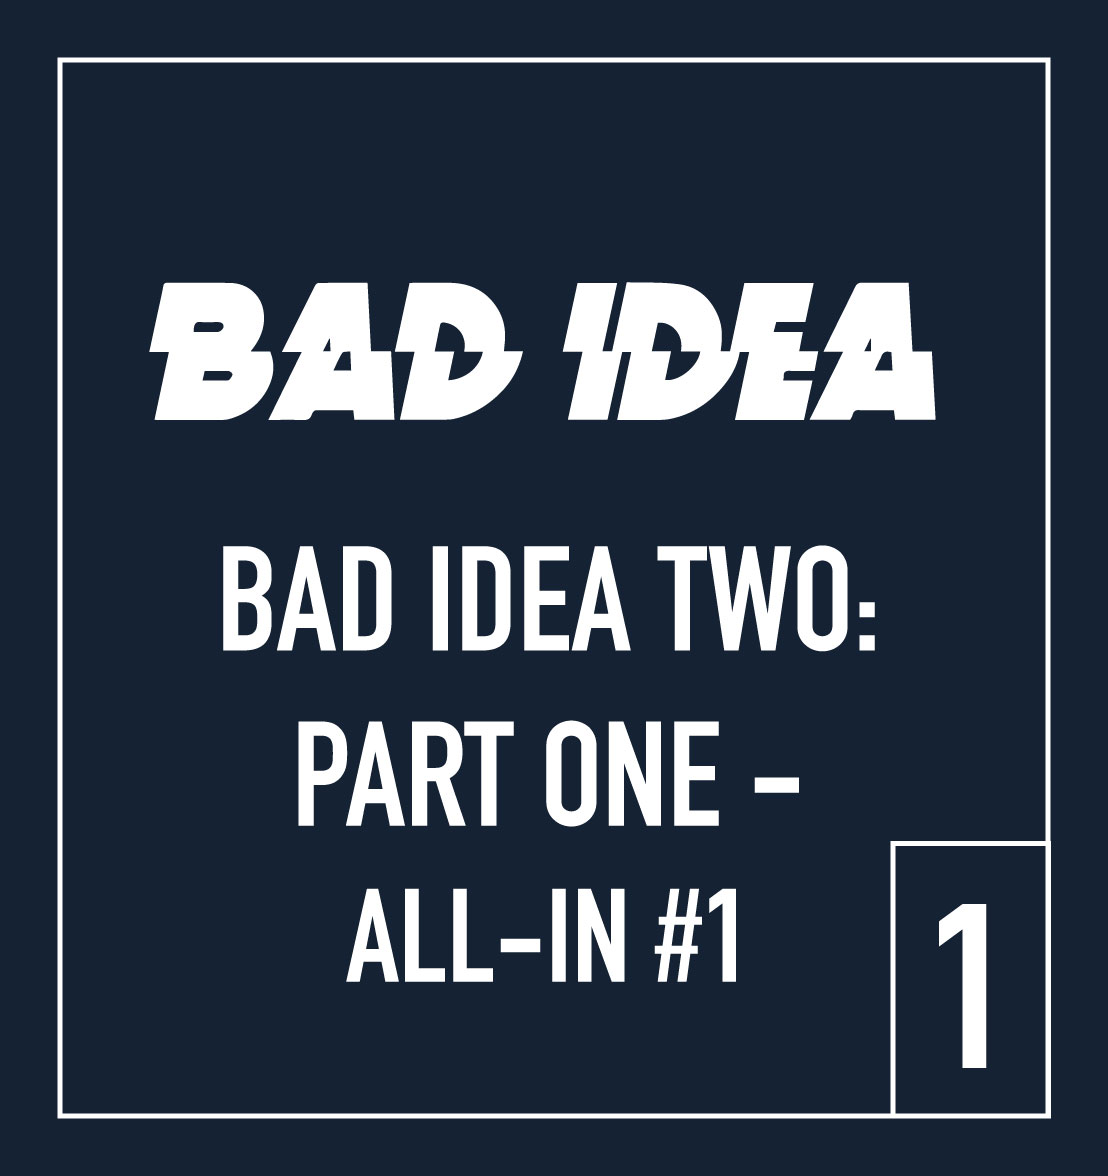 BAD IDEA TWO: PART ONE – ALL-IN #1 with STICKER